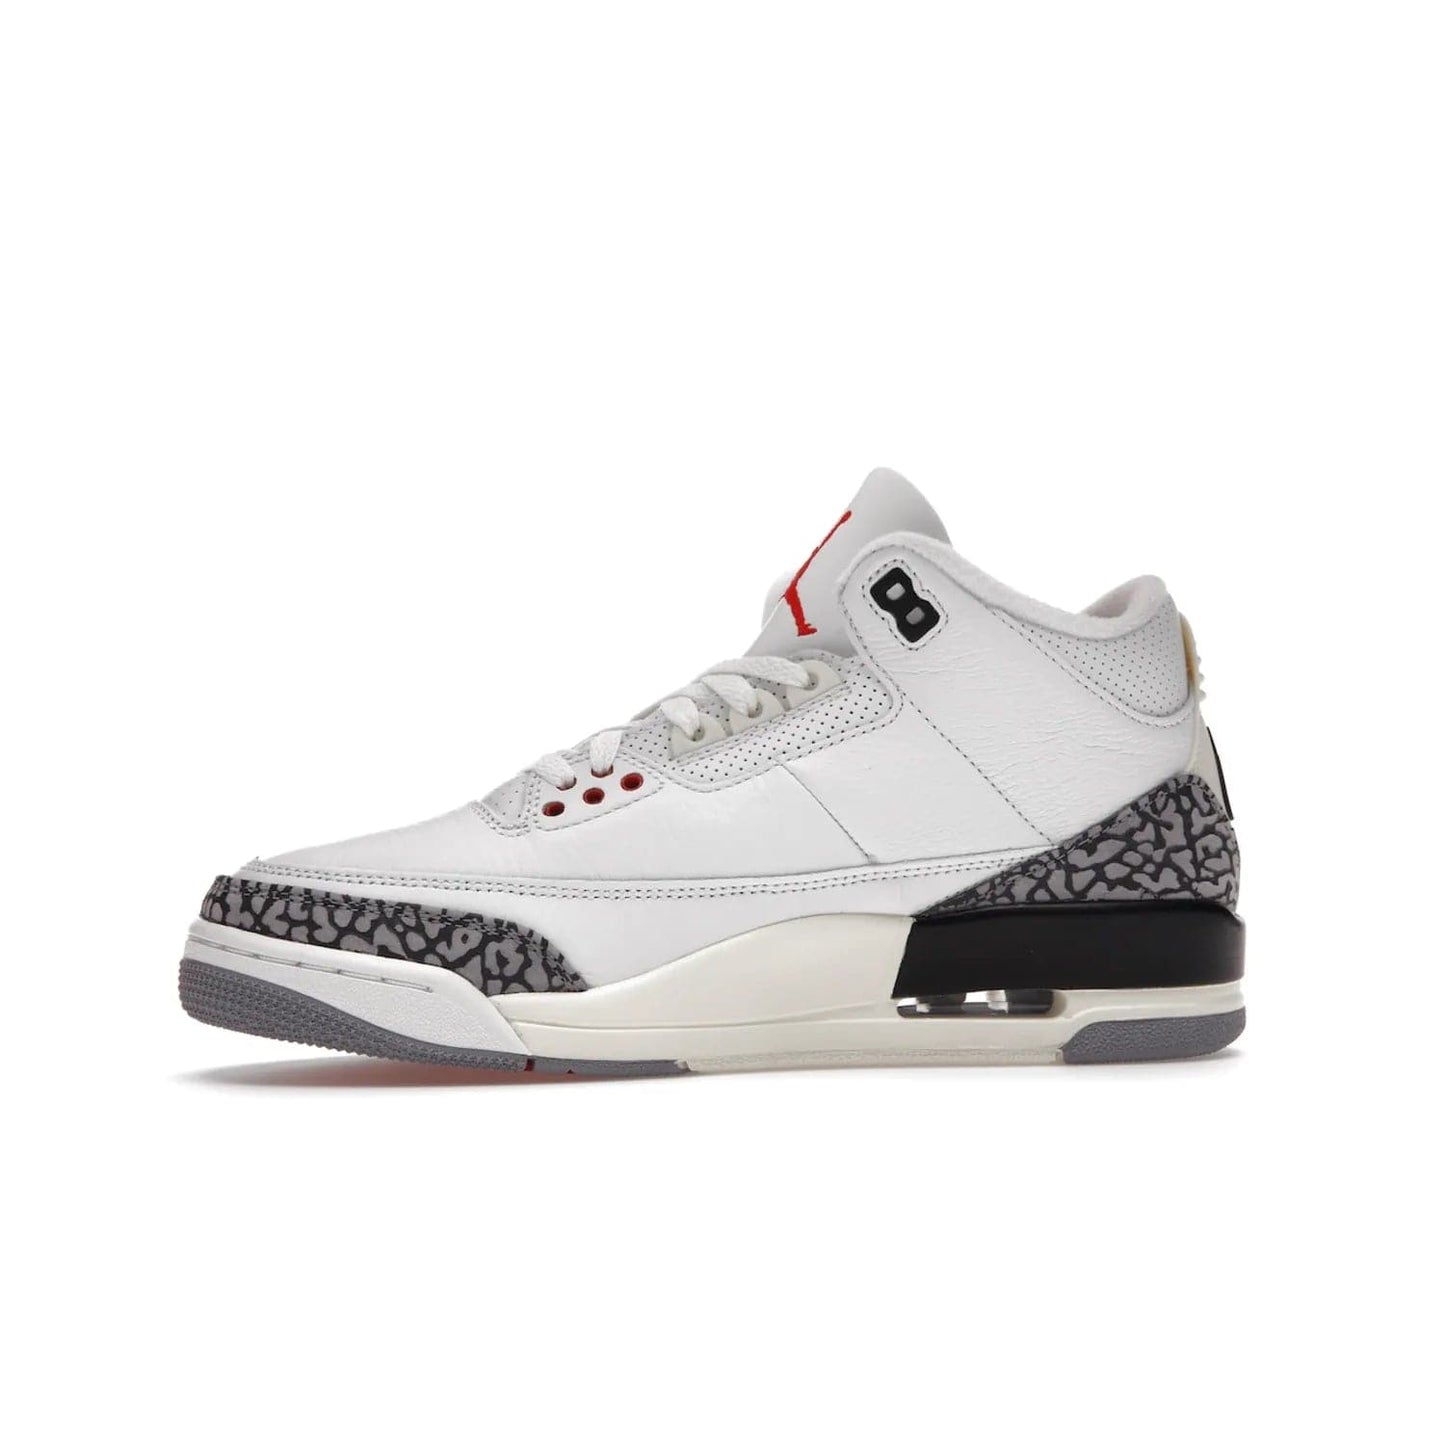 Jordan 3 Retro White Cement Reimagined - Image 18 - Only at www.BallersClubKickz.com - The Reimagined Air Jordan 3 Retro in a Summit White/Fire Red/Black/Cement Grey colorway is launching on March 11, 2023. Featuring a white leather upper, off-white midsoles and heel tabs, this vintage-look sneaker is a must-have.